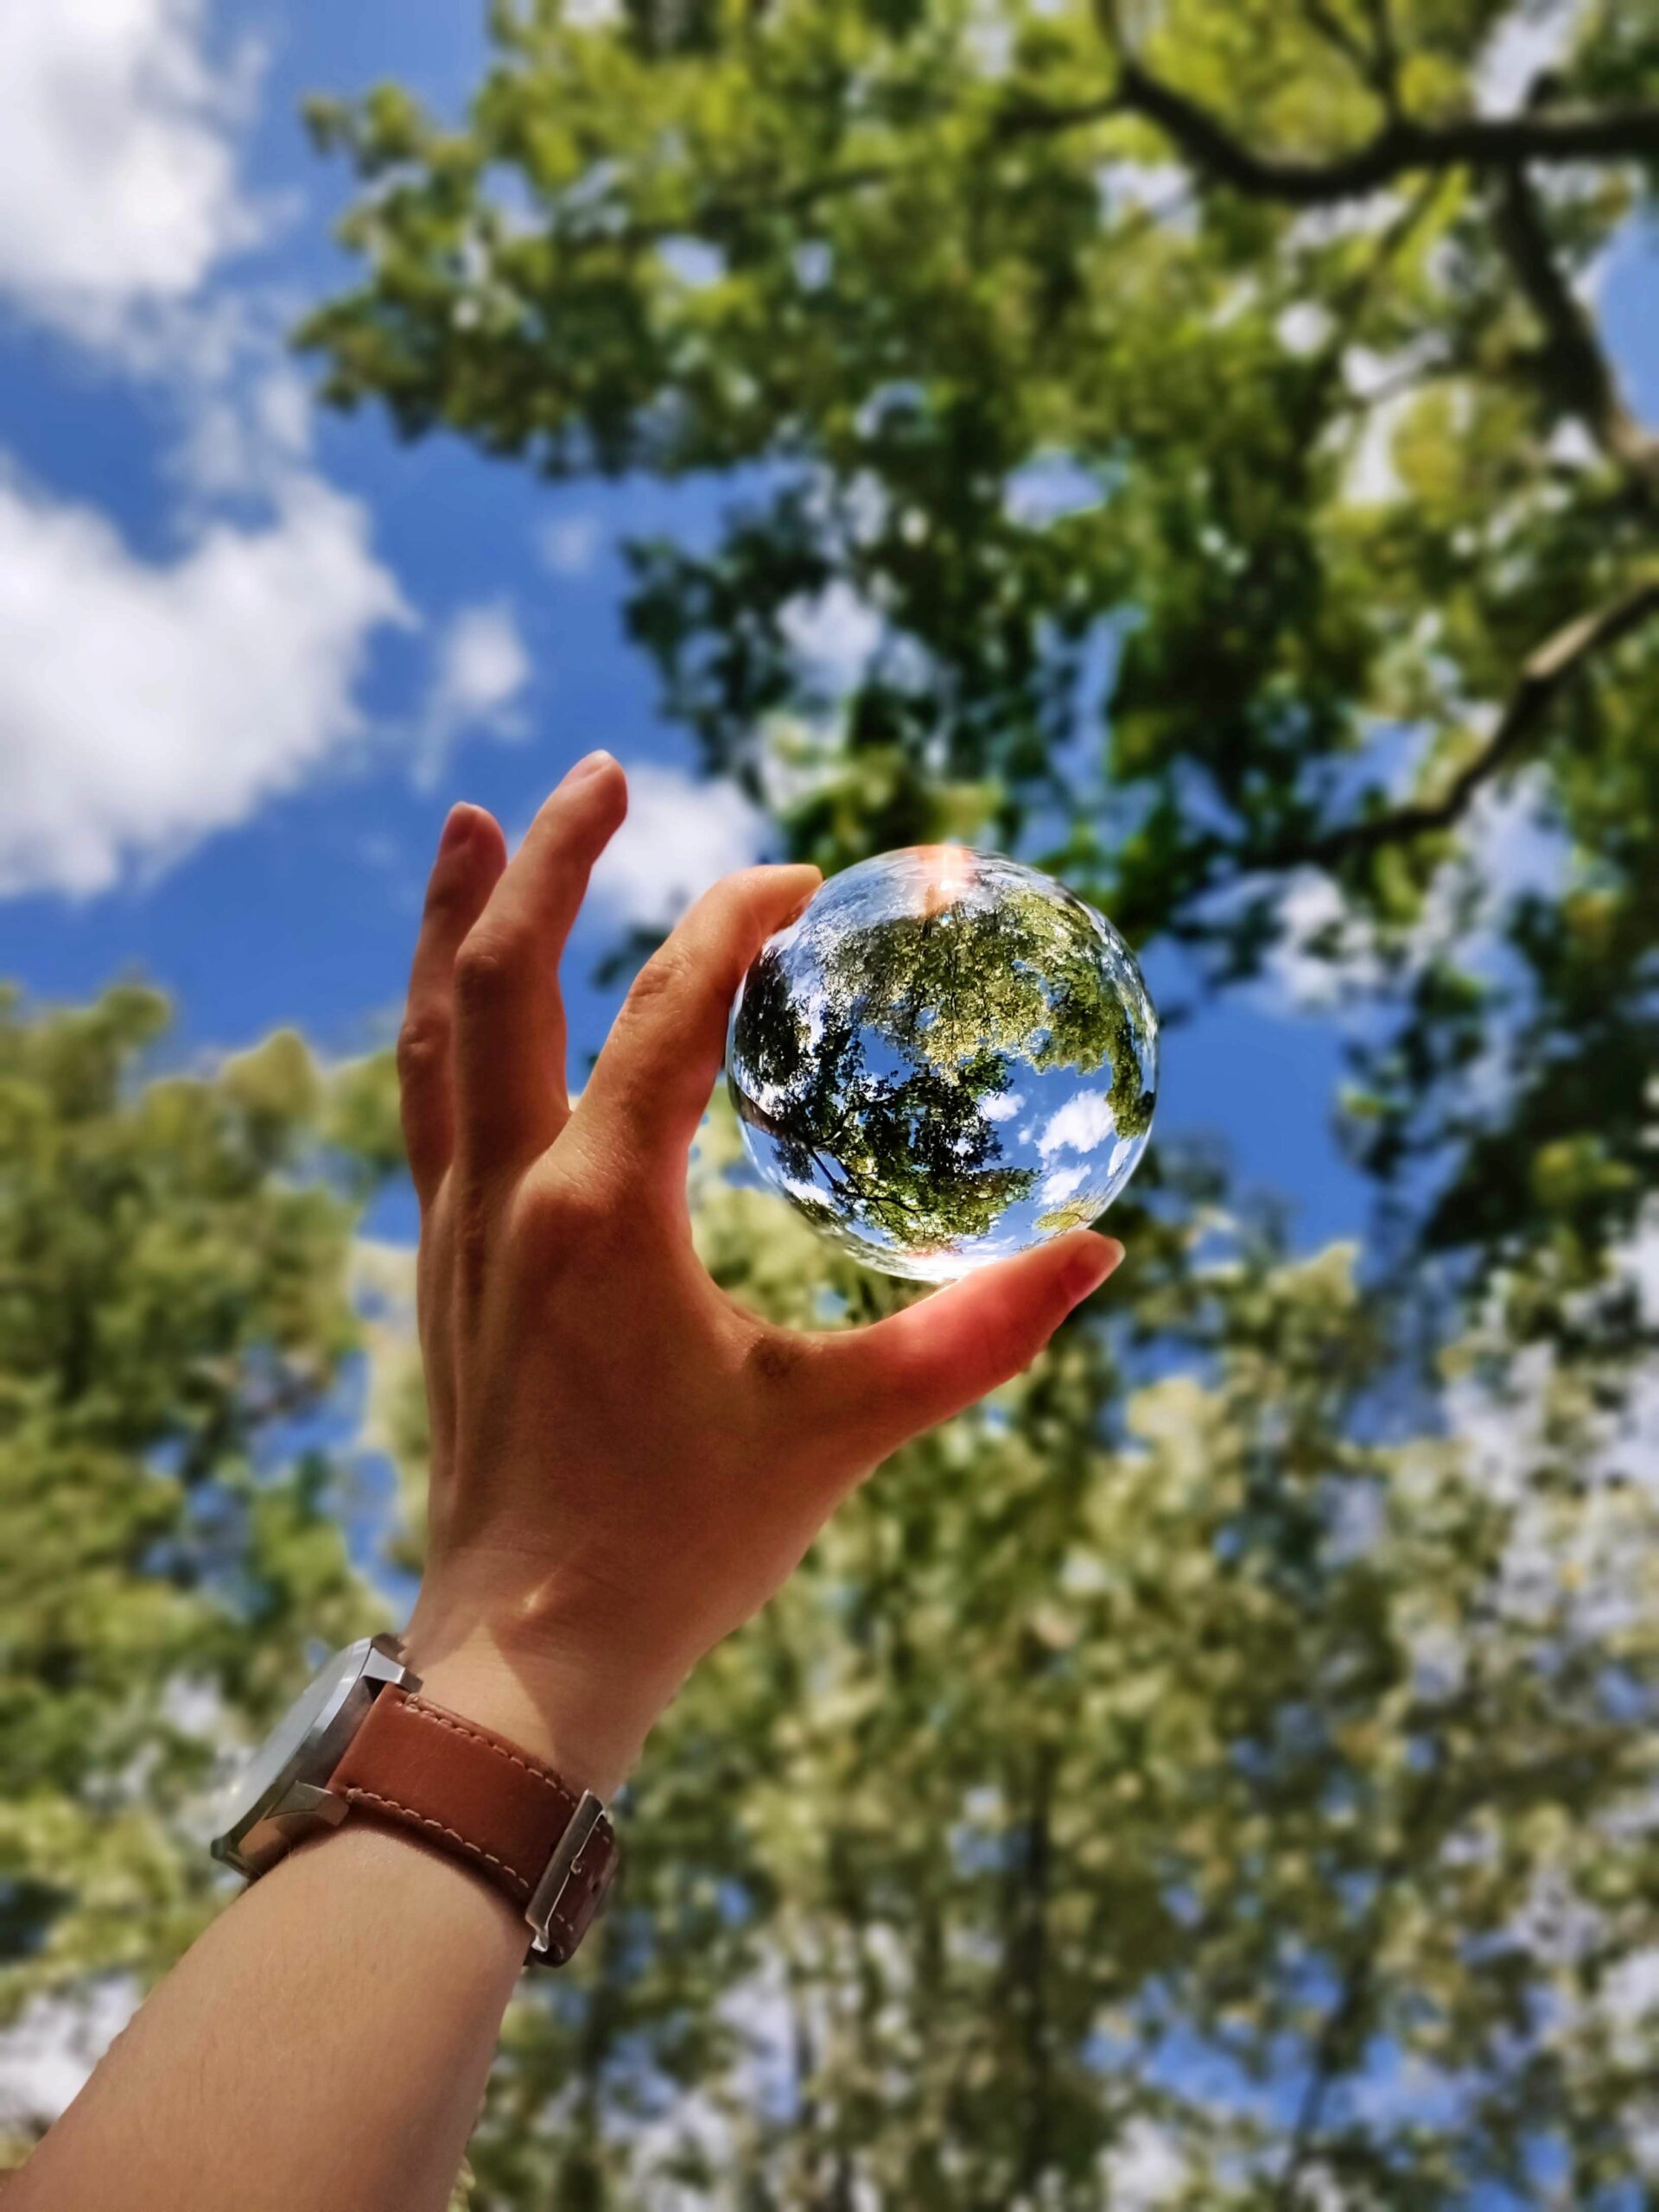 An image of someone holding a clear ball in the sky reflecting a picture of the earth